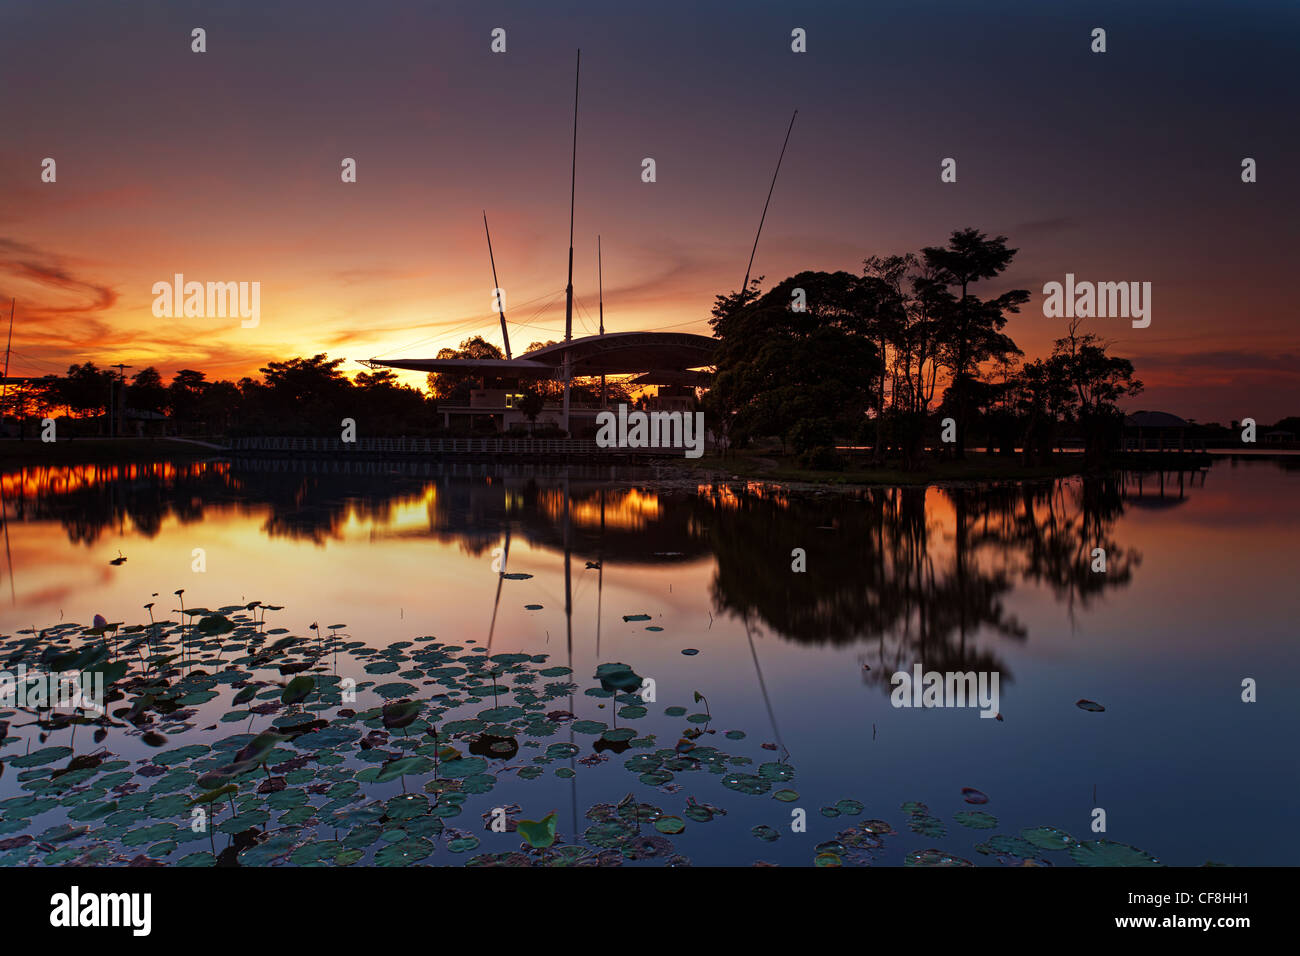 Cyberjaya Park during sunset with golden colors and attractive reflections Stock Photo